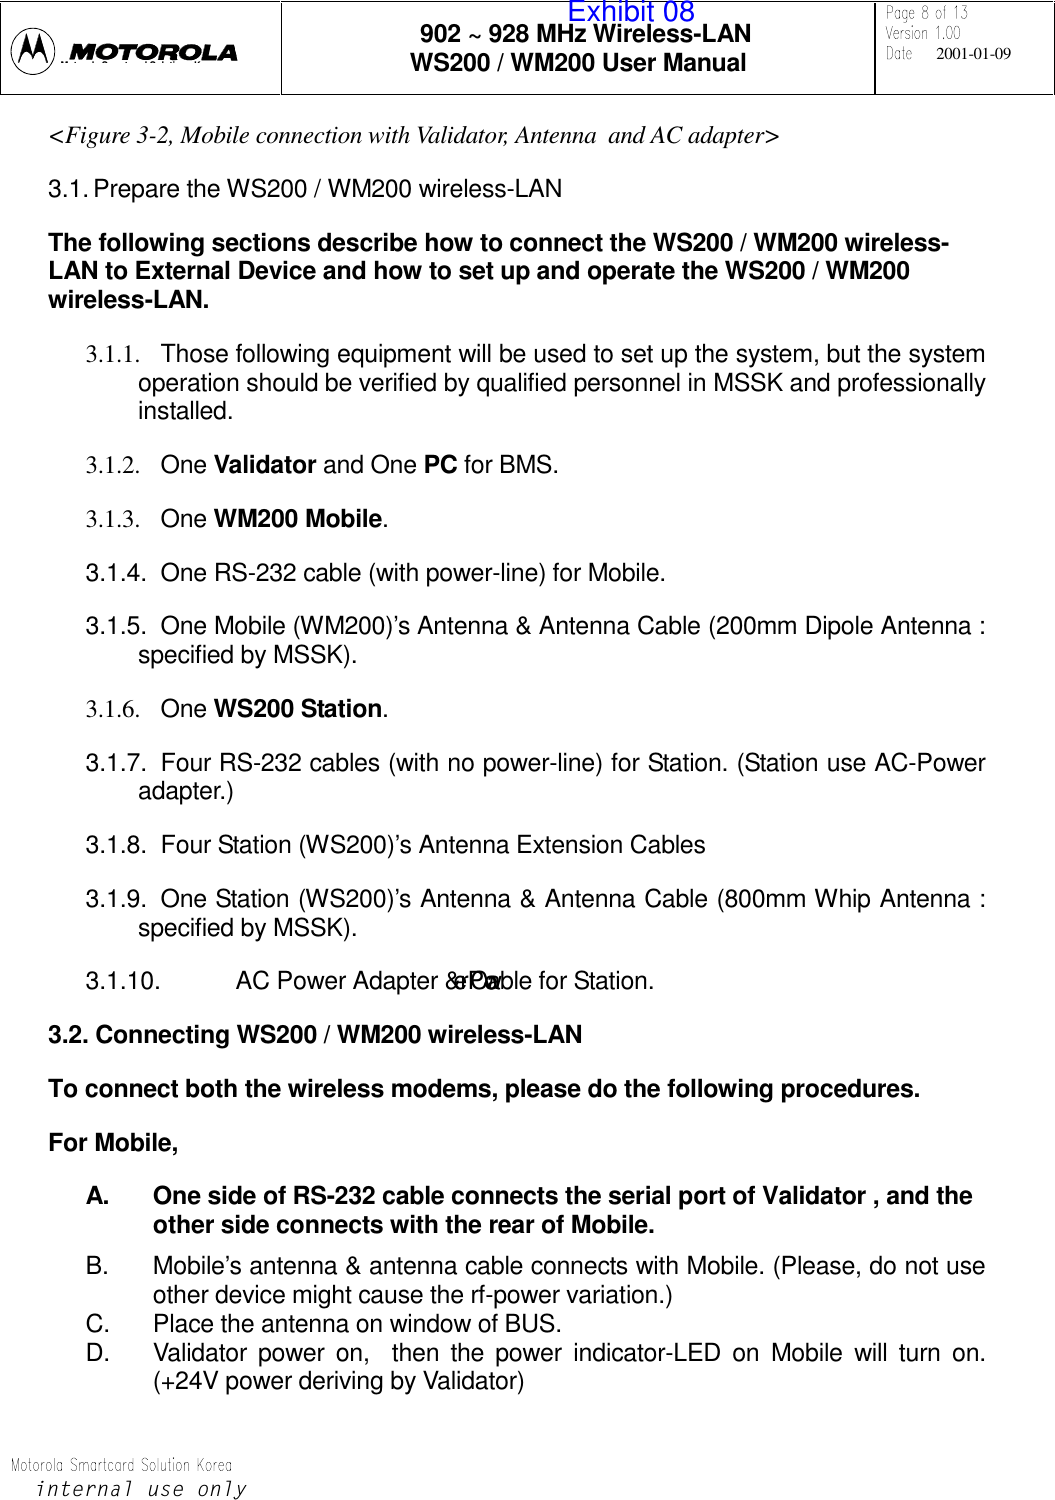 902 ~ 928 MHz Wireless-LANWS200 / WM200 User Manual 2001-01-09LQWHUQDOXVHRQO\Mt l S t dSlti K&lt;Figure 3-2, Mobile connection with Validator, Antenna  and AC adapter&gt;3.1. Prepare the WS200 / WM200 wireless-LANThe following sections describe how to connect the WS200 / WM200 wireless-LAN to External Device and how to set up and operate the WS200 / WM200wireless-LAN.3.1.1.  Those following equipment will be used to set up the system, but the systemoperation should be verified by qualified personnel in MSSK and professionallyinstalled.3.1.2. One Validator and One PC for BMS.3.1.3. One WM200 Mobile.3.1.4.  One RS-232 cable (with power-line) for Mobile.3.1.5.  One Mobile (WM200)’s Antenna &amp; Antenna Cable (200mm Dipole Antenna :specified by MSSK).3.1.6. One WS200 Station.3.1.7.  Four RS-232 cables (with no power-line) for Station. (Station use AC-Poweradapter.)3.1.8.  Four Station (WS200)’s Antenna Extension Cables3.1.9.  One Station (WS200)’s Antenna &amp; Antenna Cable (800mm Whip Antenna :specified by MSSK).3.1.10.  AC Power Adapter &amp; Power Cable for Station.3.2. Connecting WS200 / WM200 wireless-LANTo connect both the wireless modems, please do the following procedures.For Mobile,A.  One side of RS-232 cable connects the serial port of Validator , and theother side connects with the rear of Mobile.B.  Mobile’s antenna &amp; antenna cable connects with Mobile. (Please, do not useother device might cause the rf-power variation.)C.  Place the antenna on window of BUS.D.  Validator power on,  then the power indicator-LED on Mobile will turn on.(+24V power deriving by Validator)Exhibit 08